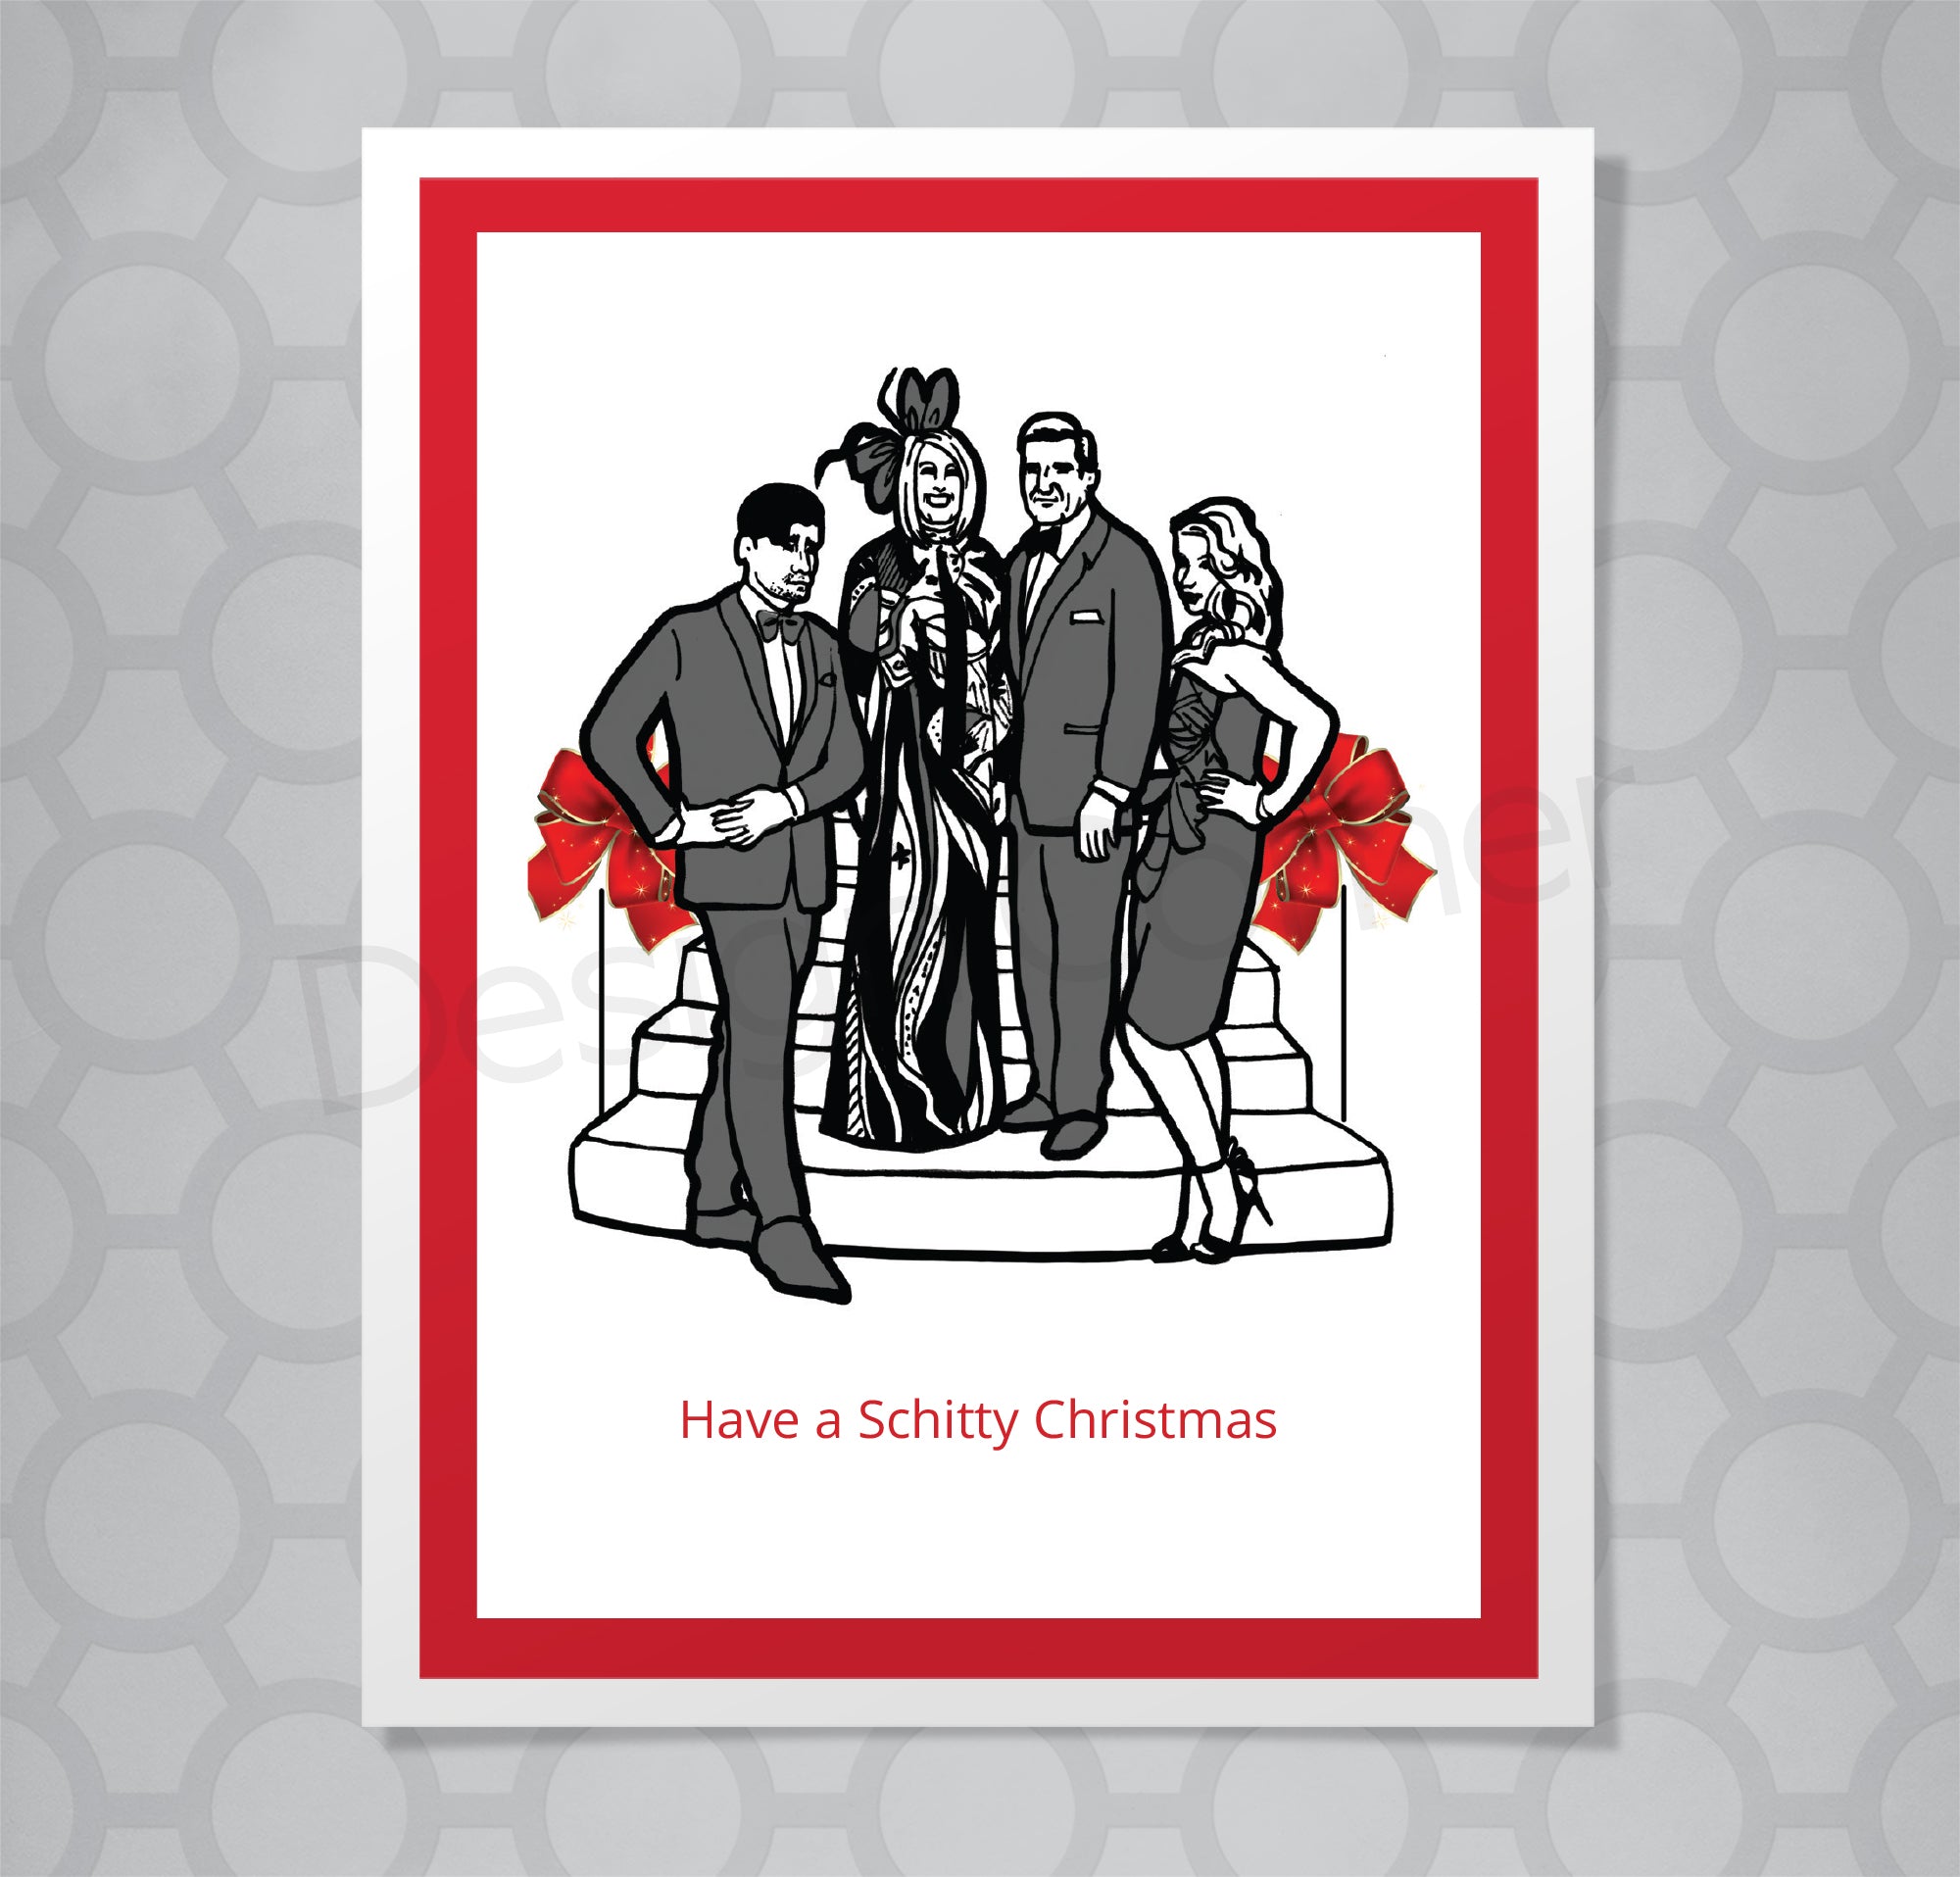 All four Schitts Creek characters illustrated in front of grand staircase at Christmas time on greeting card. Caption says "Have a Schitty Christmas".